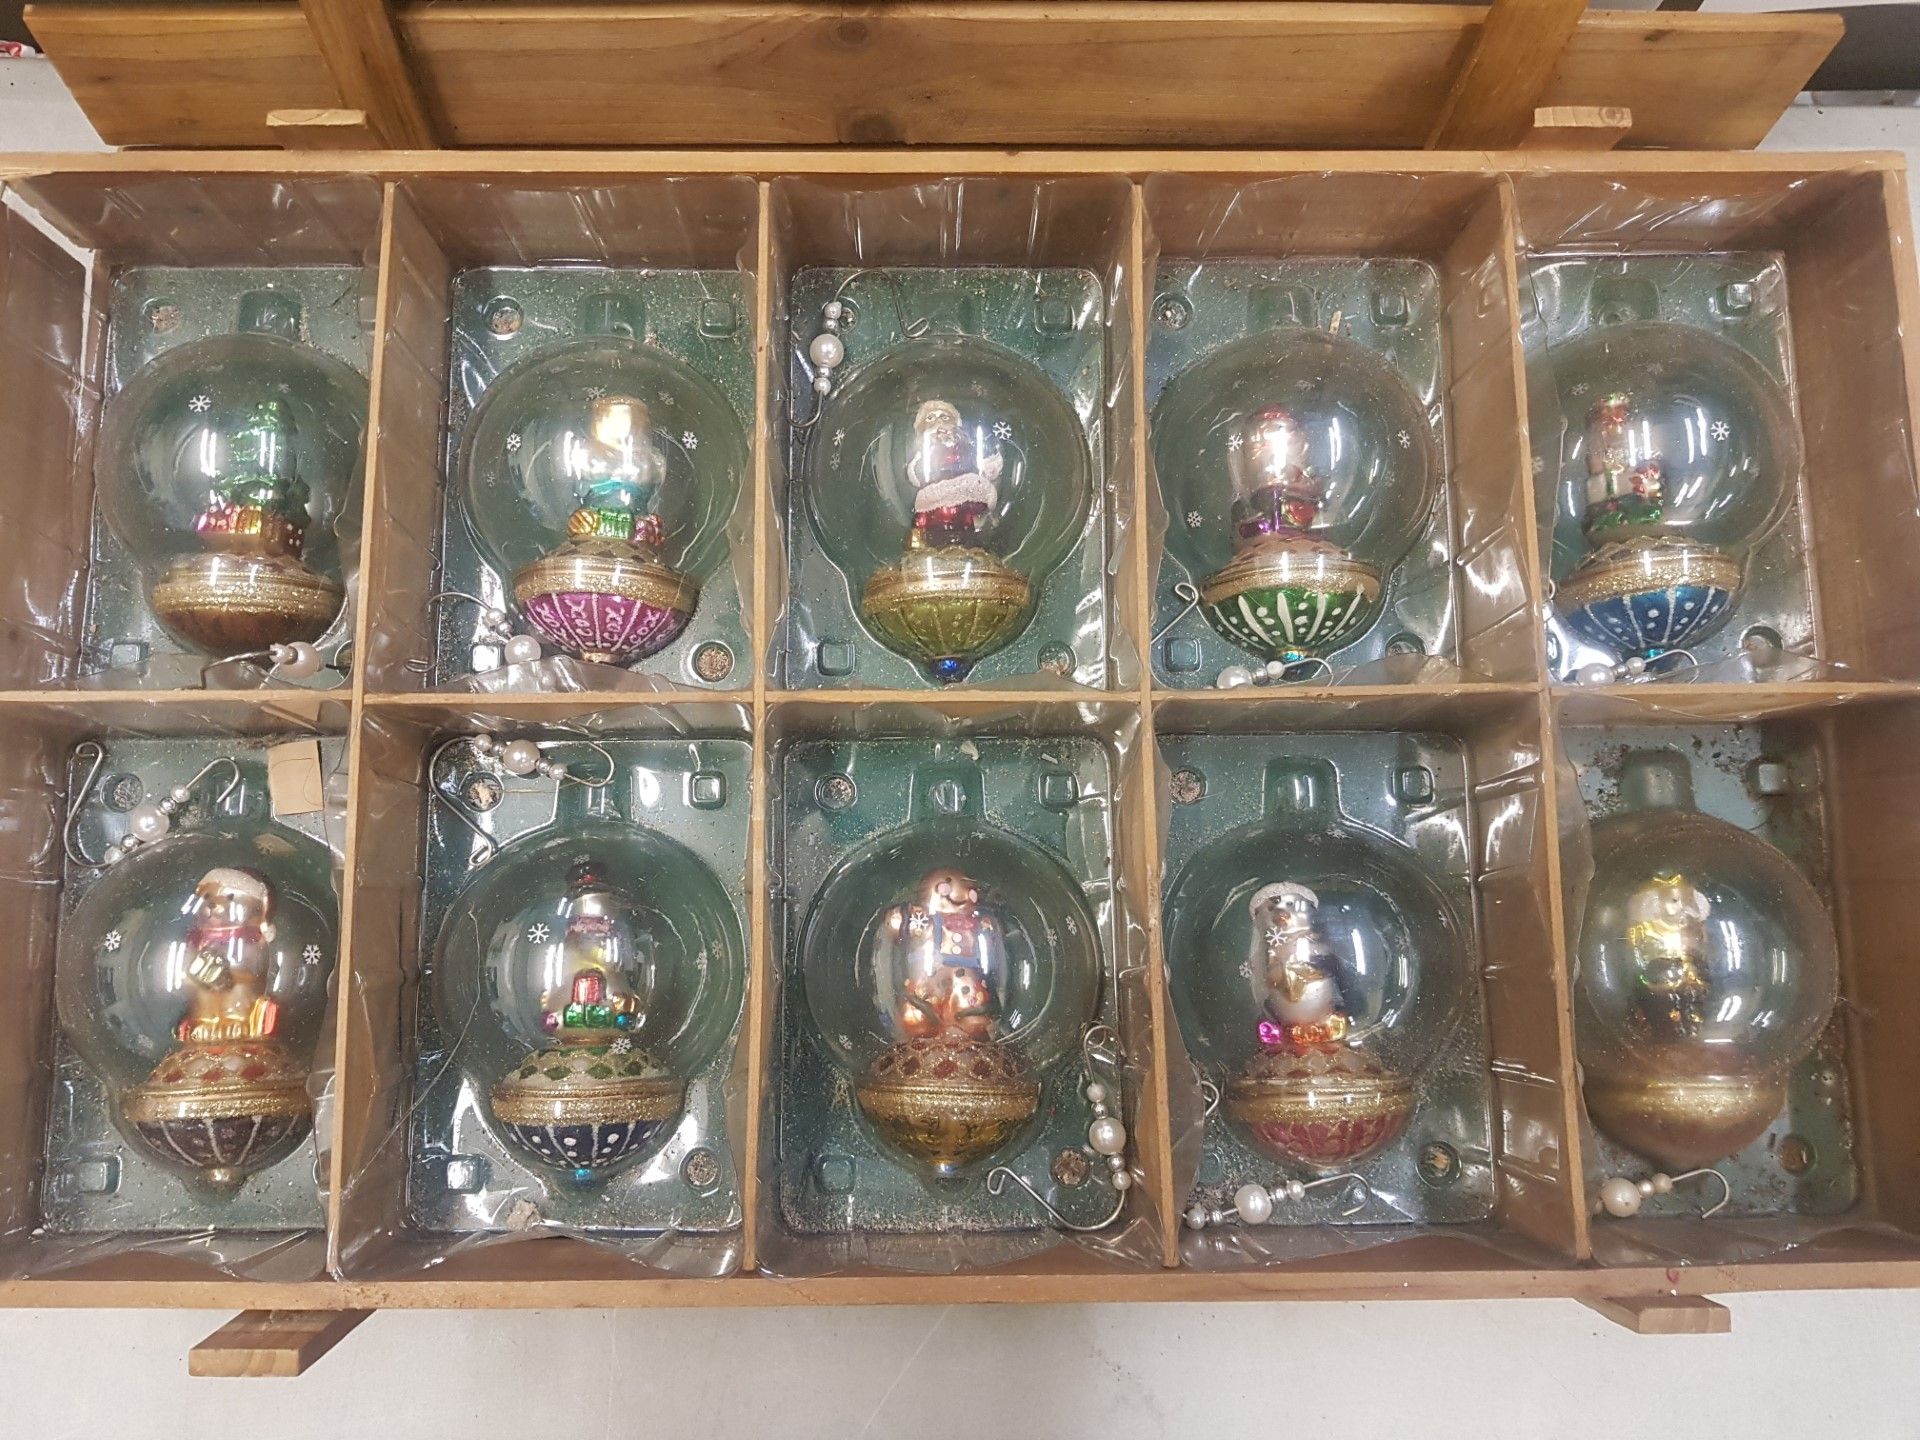 Thomas Pacconi classics hand blown glass christmas decorations set of 10 in original packaging - Image 2 of 2